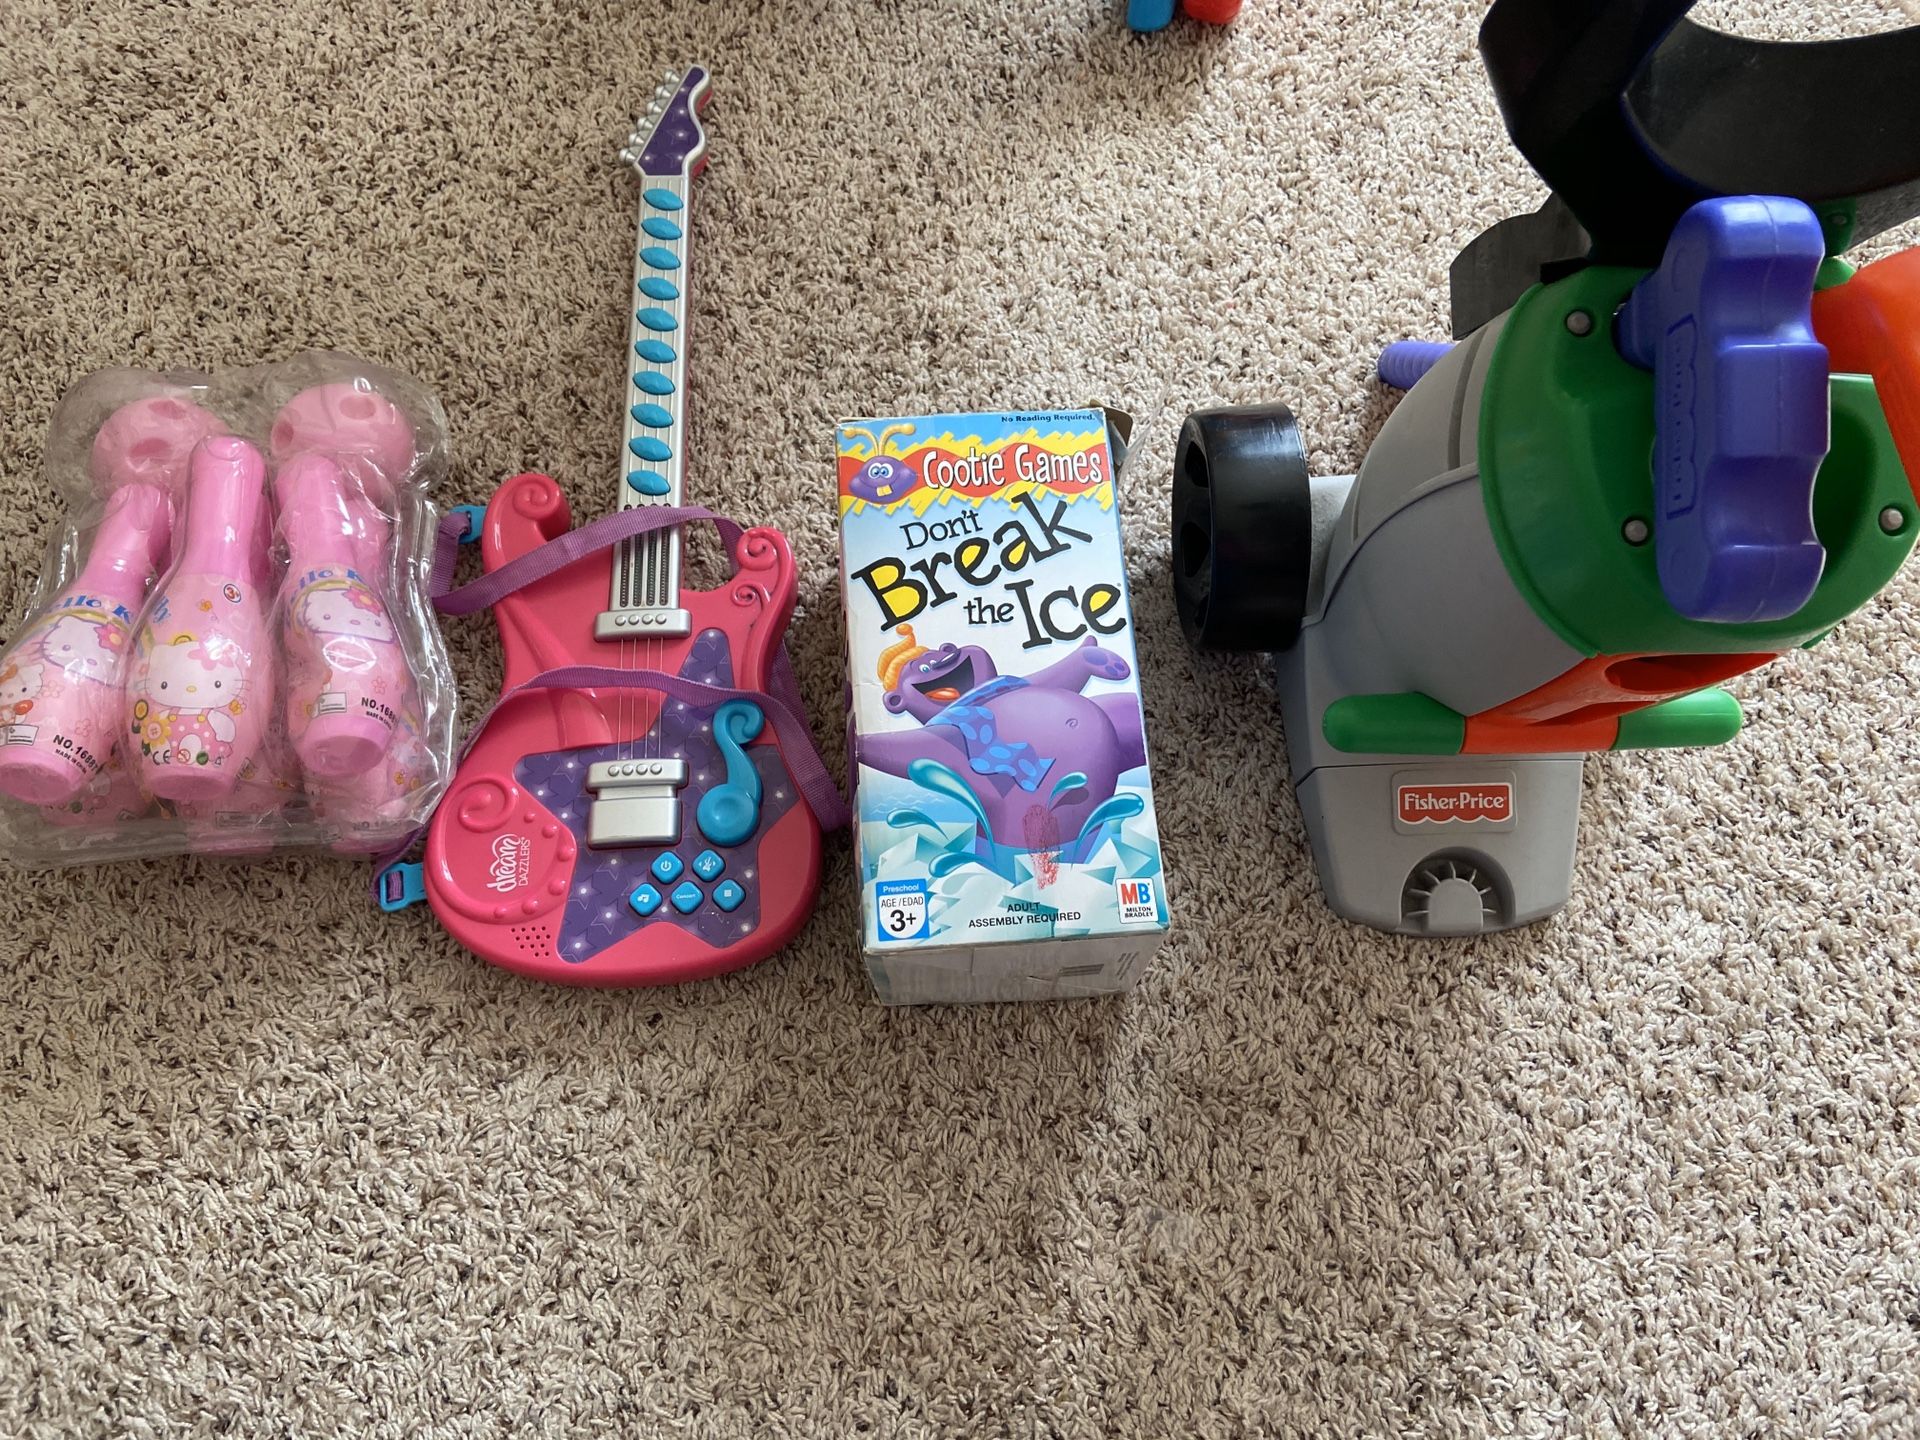 All toys for $15, fisher price golf, cootie game, guitar, bowling game